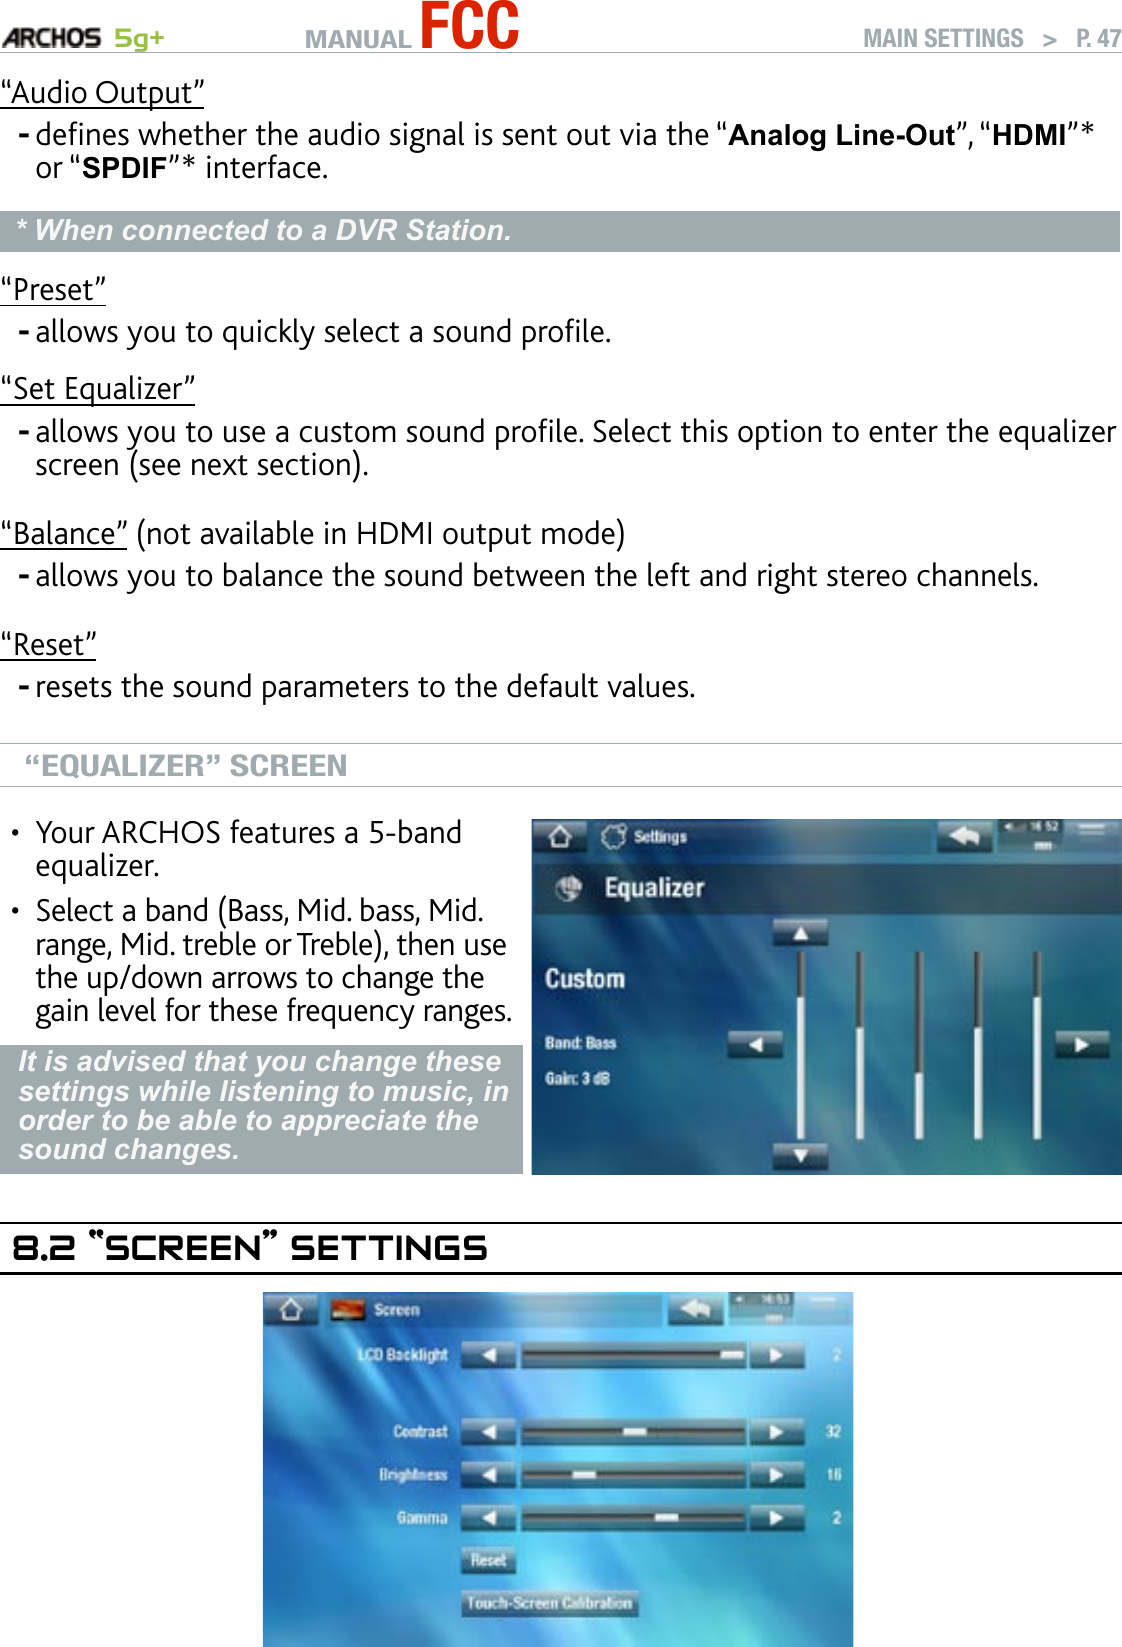 MANUAL FCC 5g+ MAIN SETTINGS   &gt;   P. 47“Audio Output”denes whether the audio signal is sent out via the “Analog Line-Out”, “HDMI”* or “SPDIF”* interface.* When connected to a DVR Station.“Preset”allows you to quickly select a sound prole.“Set Equalizer”allows you to use a custom sound prole. Select this option to enter the equalizer screen (see next section).“Balance” (not available in HDMI output mode)allows you to balance the sound between the left and right stereo channels.“Reset”resets the sound parameters to the default values.“EQUALIZER” SCREENYour ARCHOS features a 5-band equalizer.Select a band (Bass, Mid. bass, Mid. range, Mid. treble or Treble), then use the up/down arrows to change the gain level for these frequency ranges.••It is advised that you change these settings while listening to music, in order to be able to appreciate the sound changes.8.2 “sCreen” seTTIngs-----